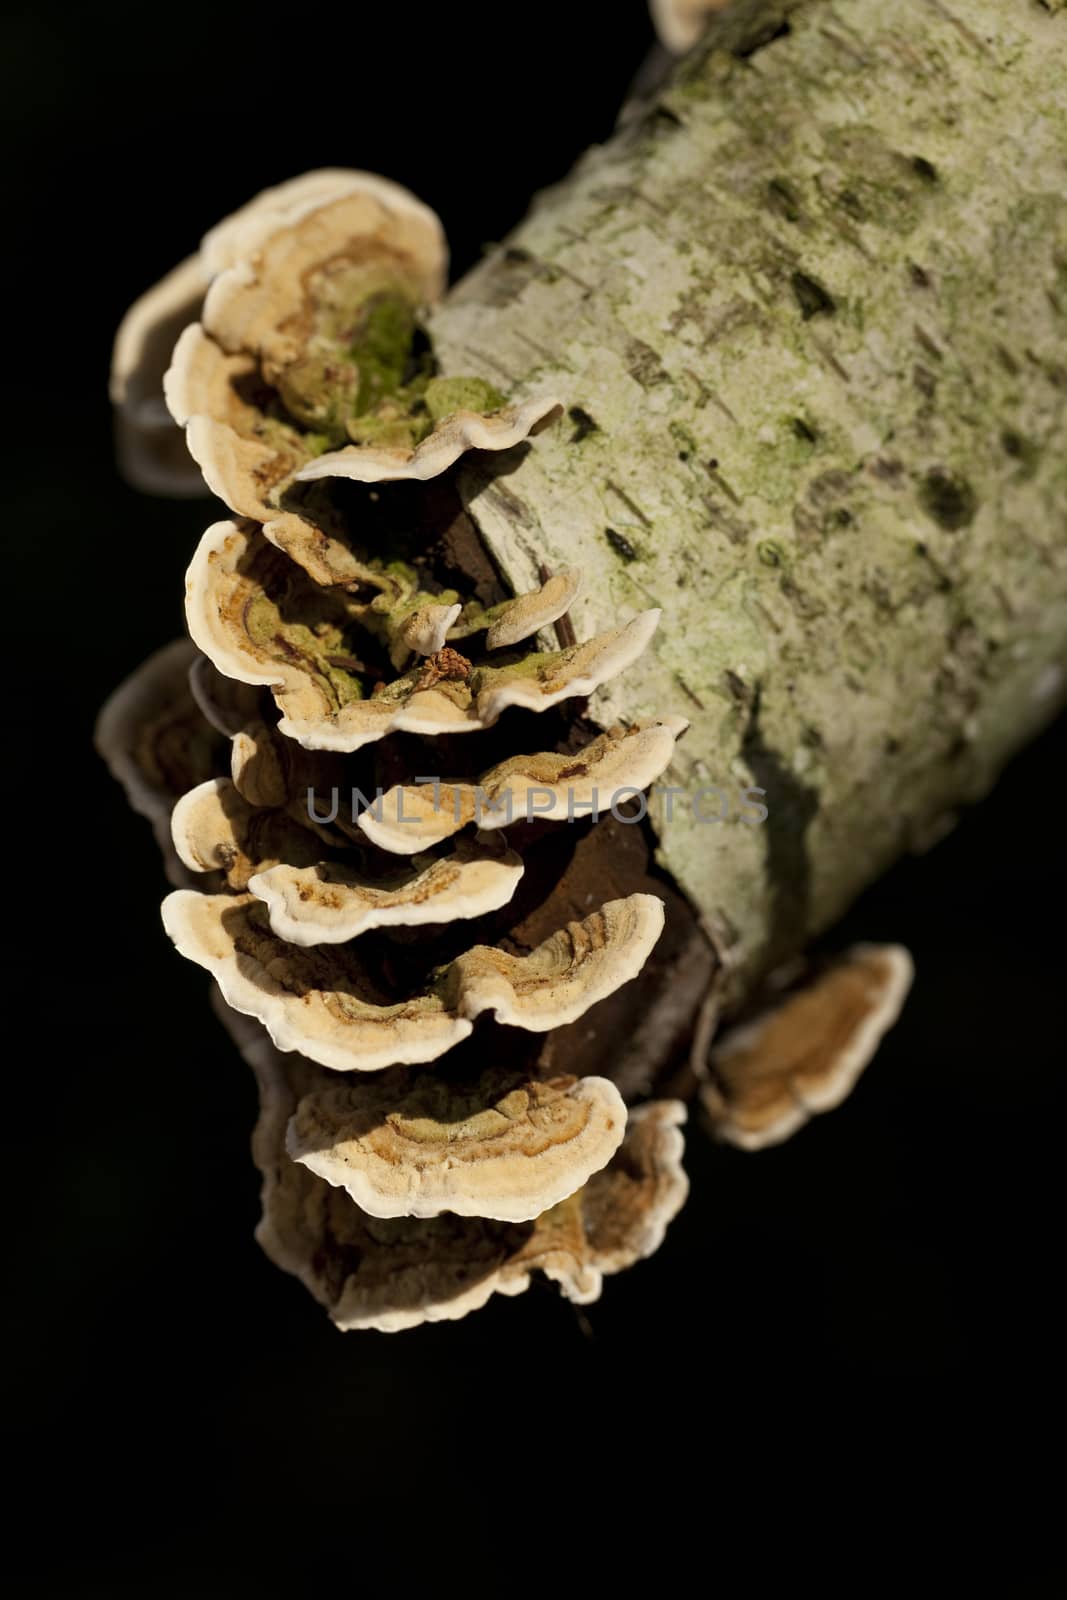 group much fungus on birch (Trametes versicolor)    